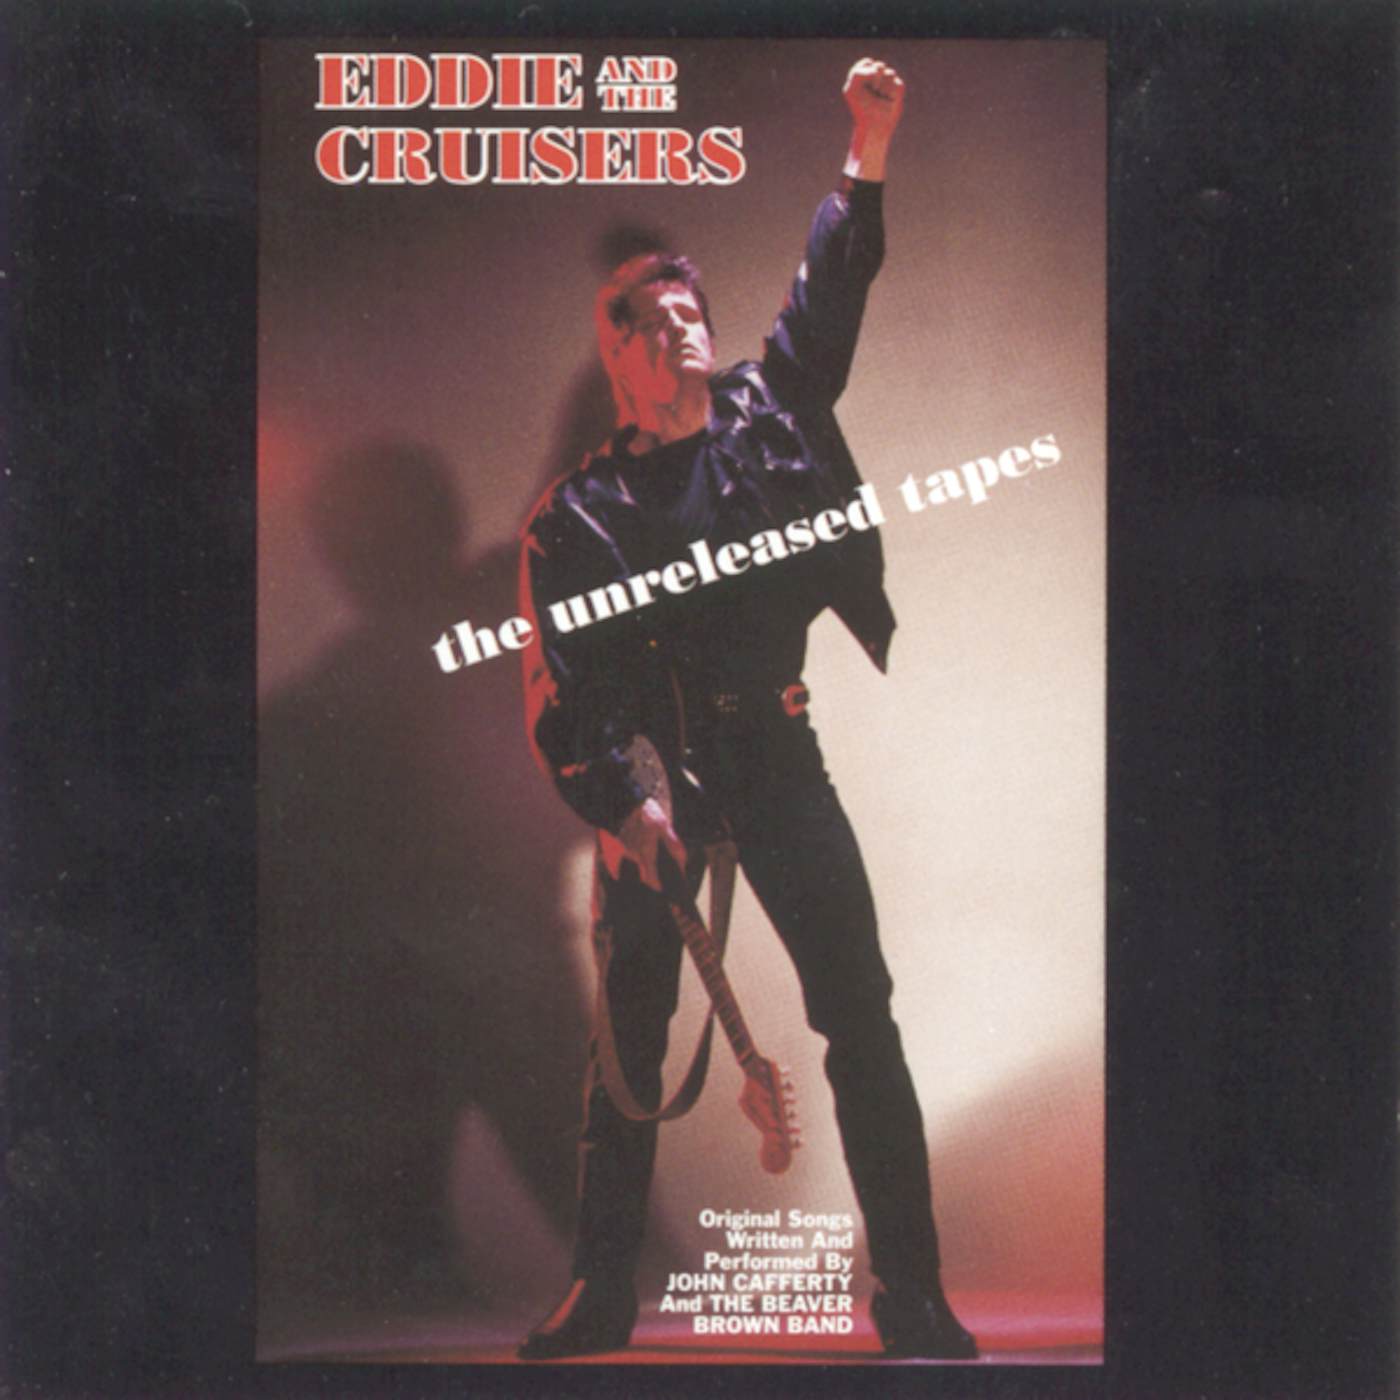 John Cafferty & the Beaver Brown Band EDDIE & THE CRUISERS: UNRELEASED TAPES CD